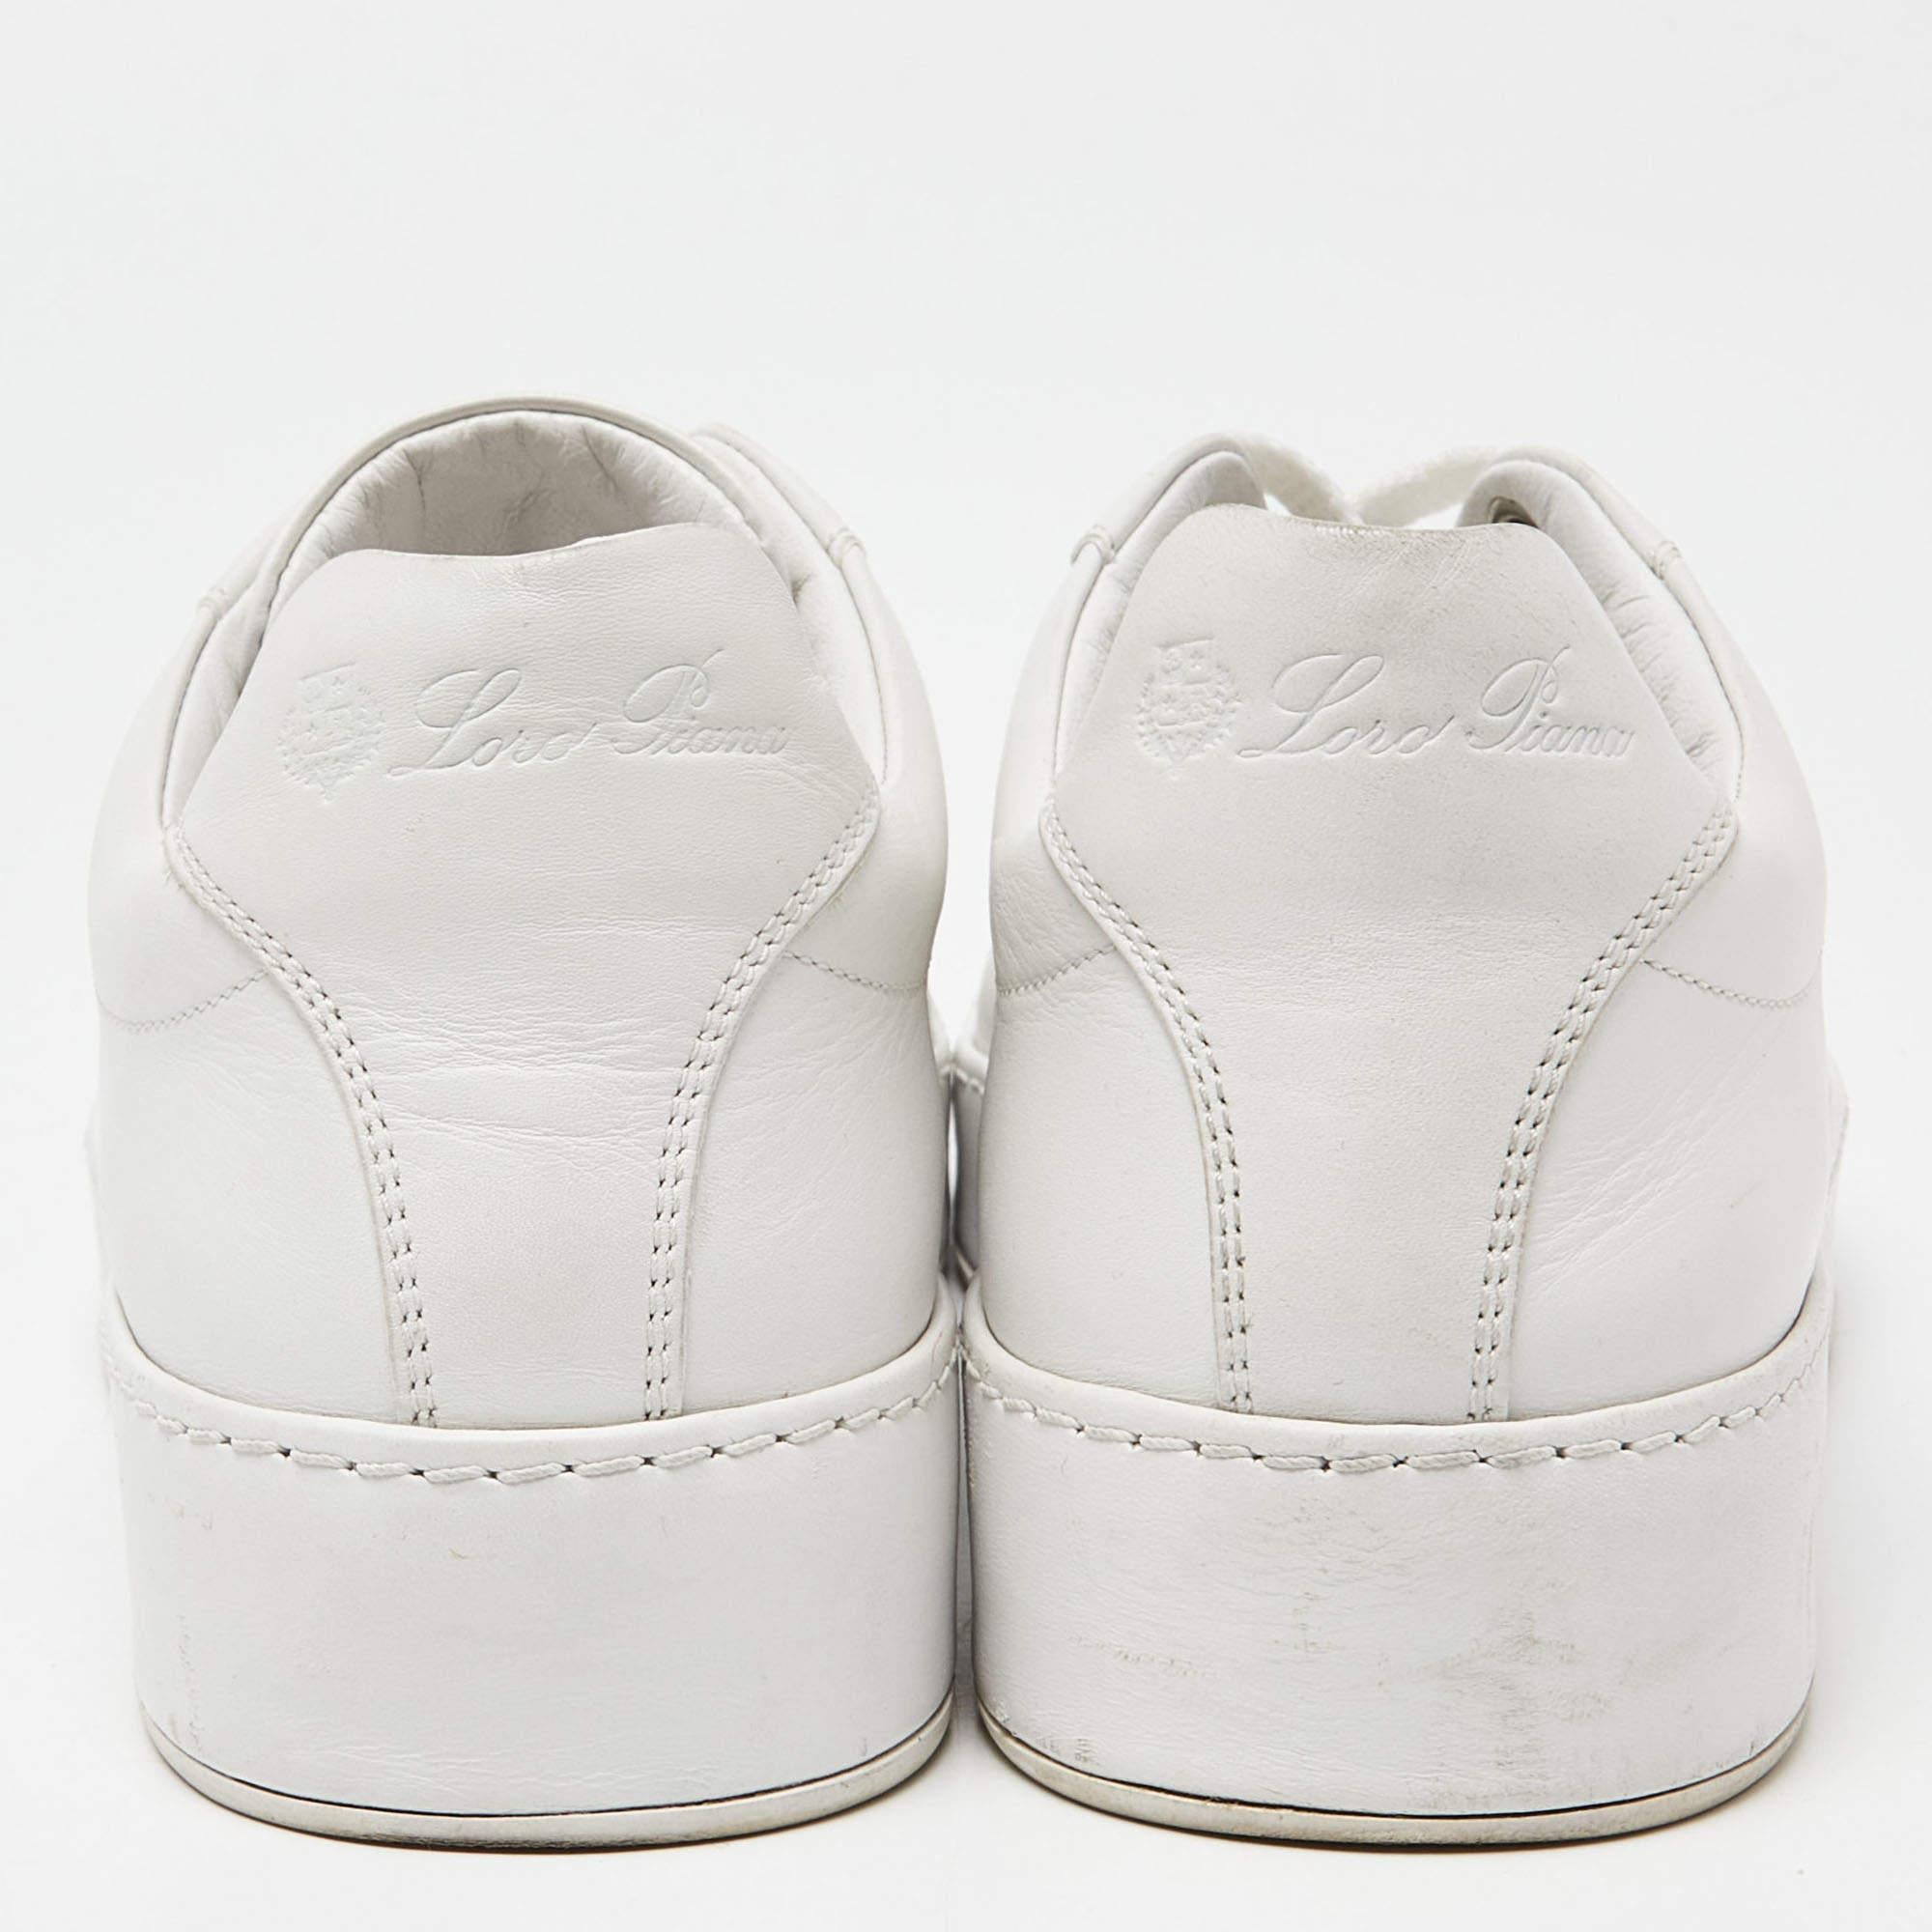 Loro Piana White Leather Nuages Sneakers Size 37.5 2